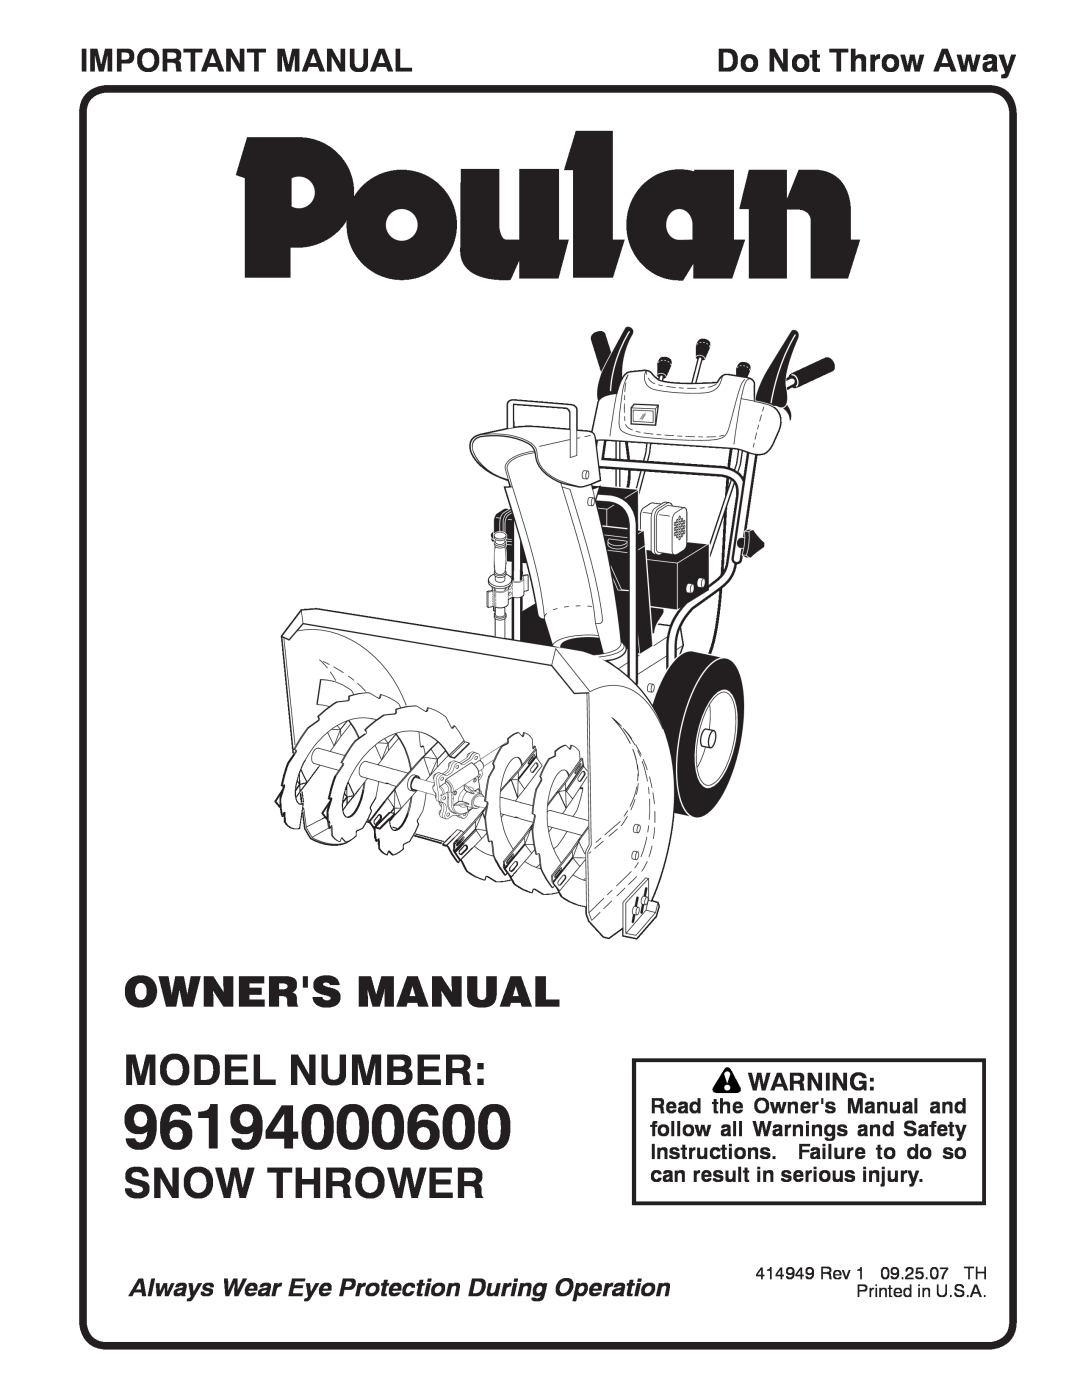 Poulan 414949 owner manual Snow Thrower, Important Manual, Do Not Throw Away, 96194000600 